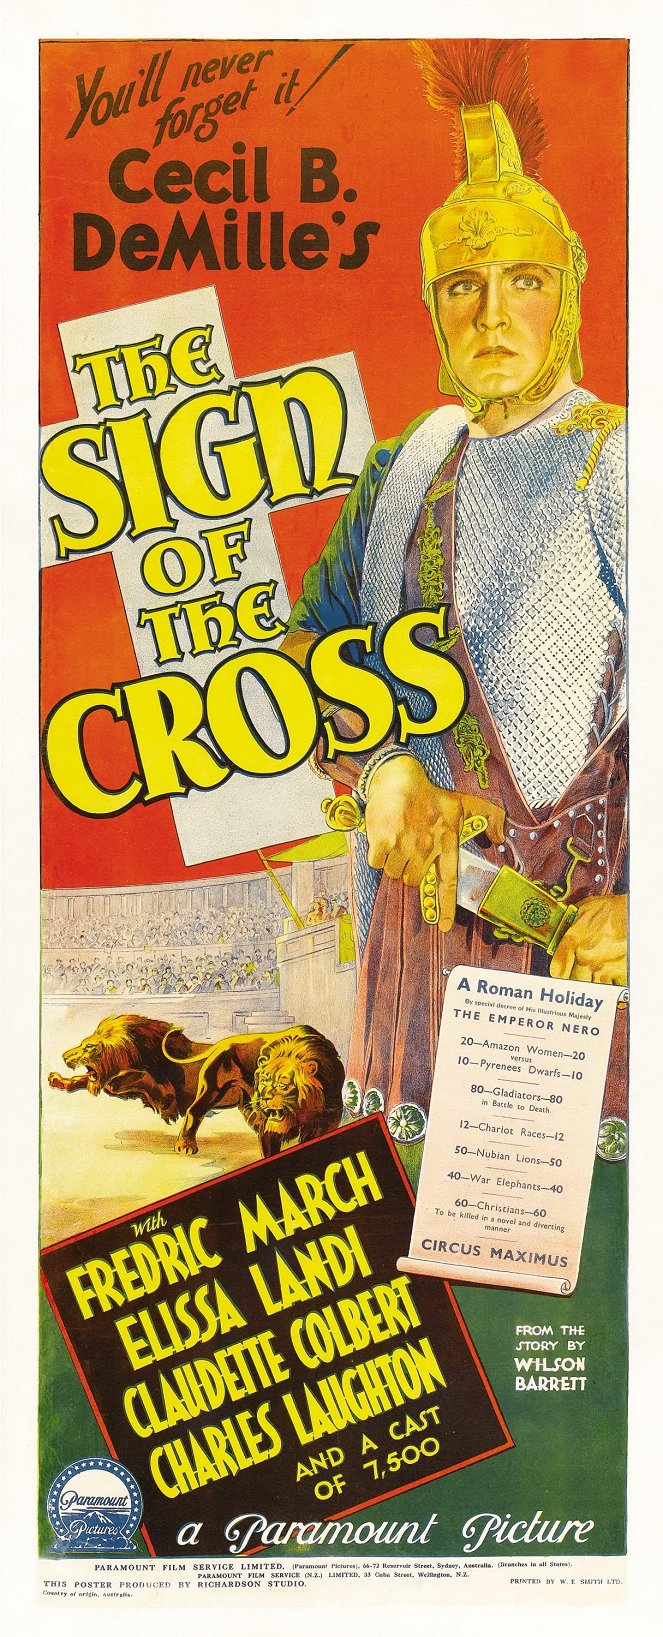 The Sign of the Cross - Posters